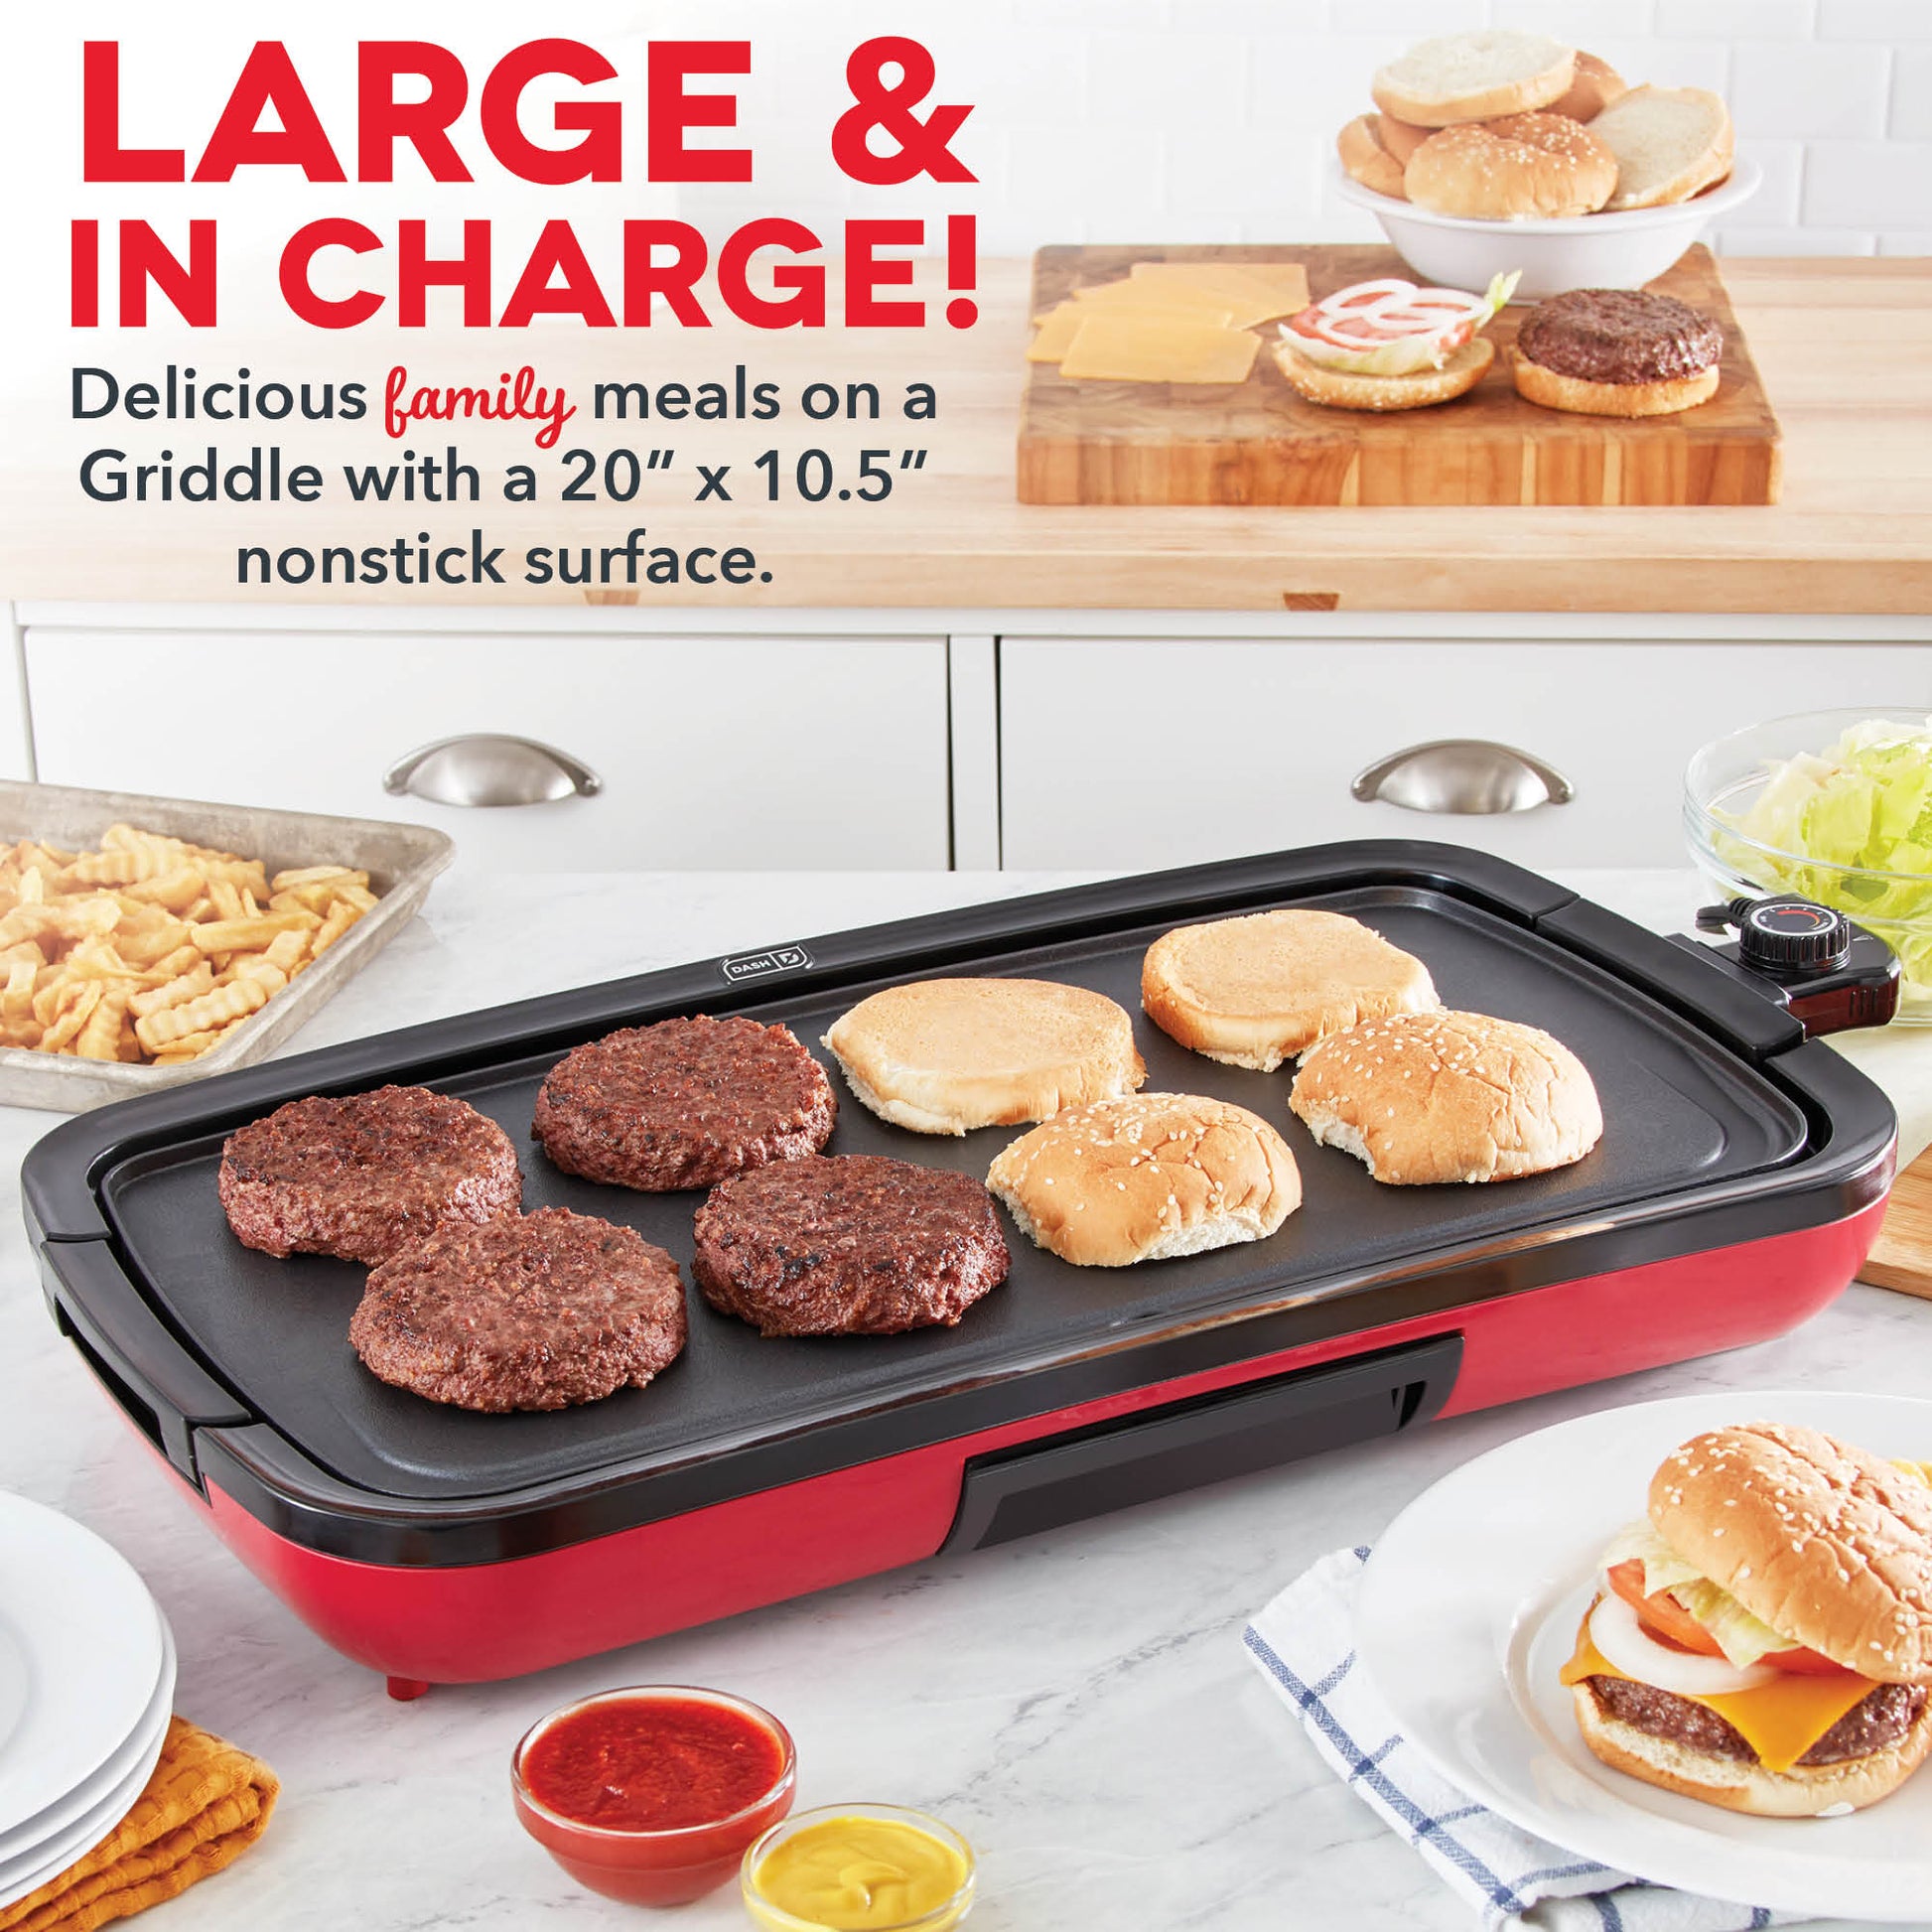 Dash DEG200GBAQ01 Everyday Nonstick Electric Griddle for Pancakes, Burgers,  Quesadillas, Eggs